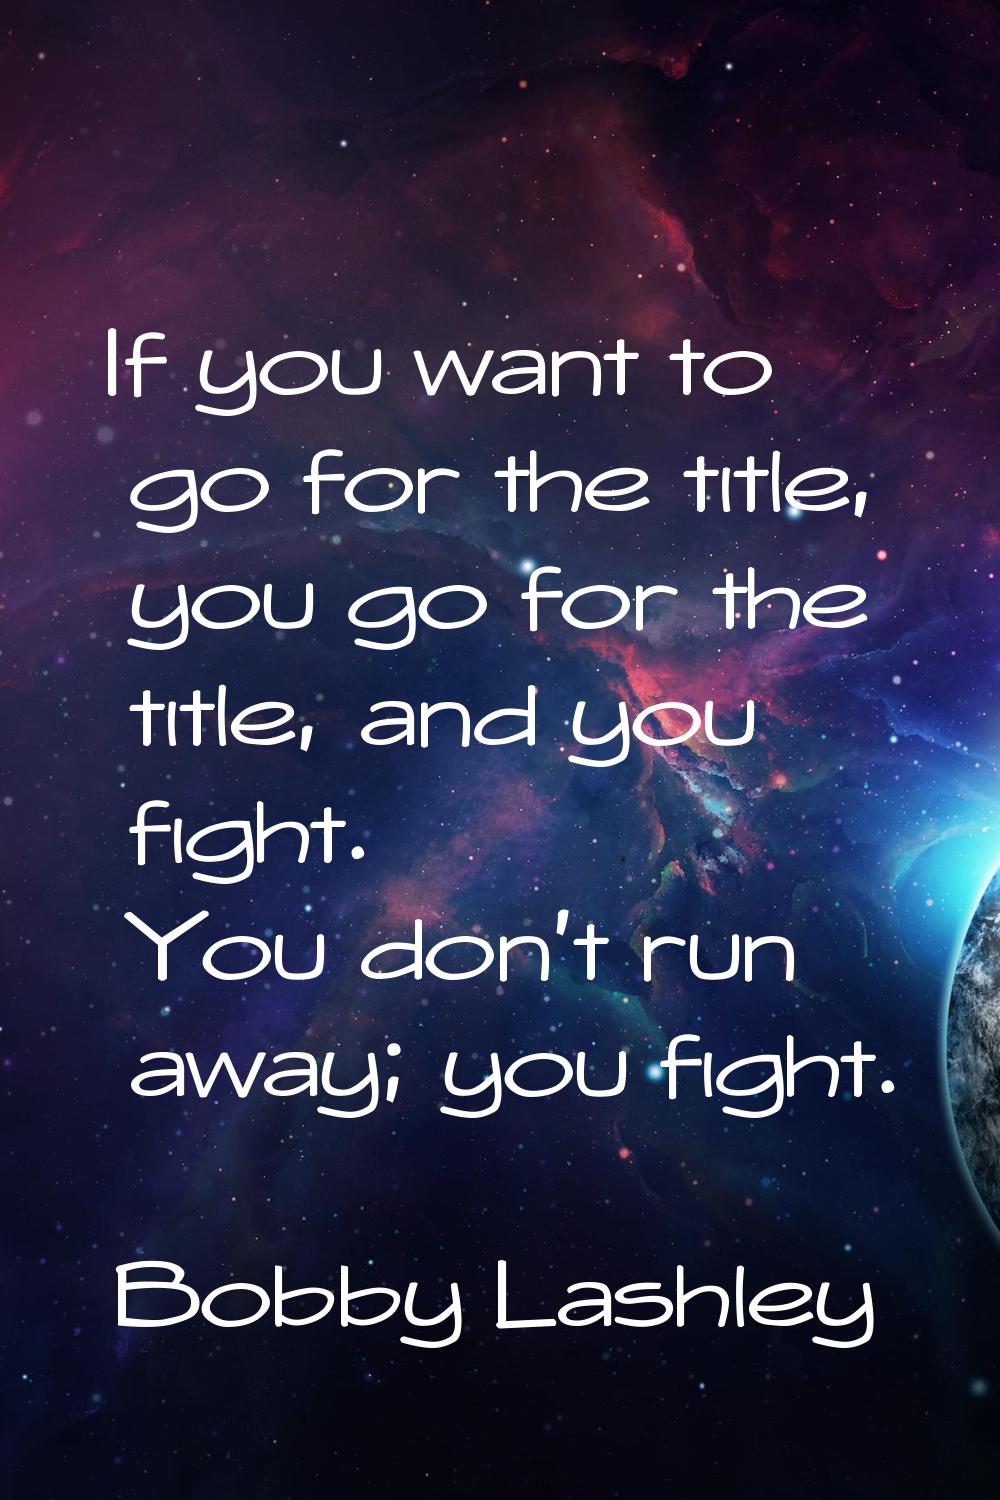 If you want to go for the title, you go for the title, and you fight. You don't run away; you fight